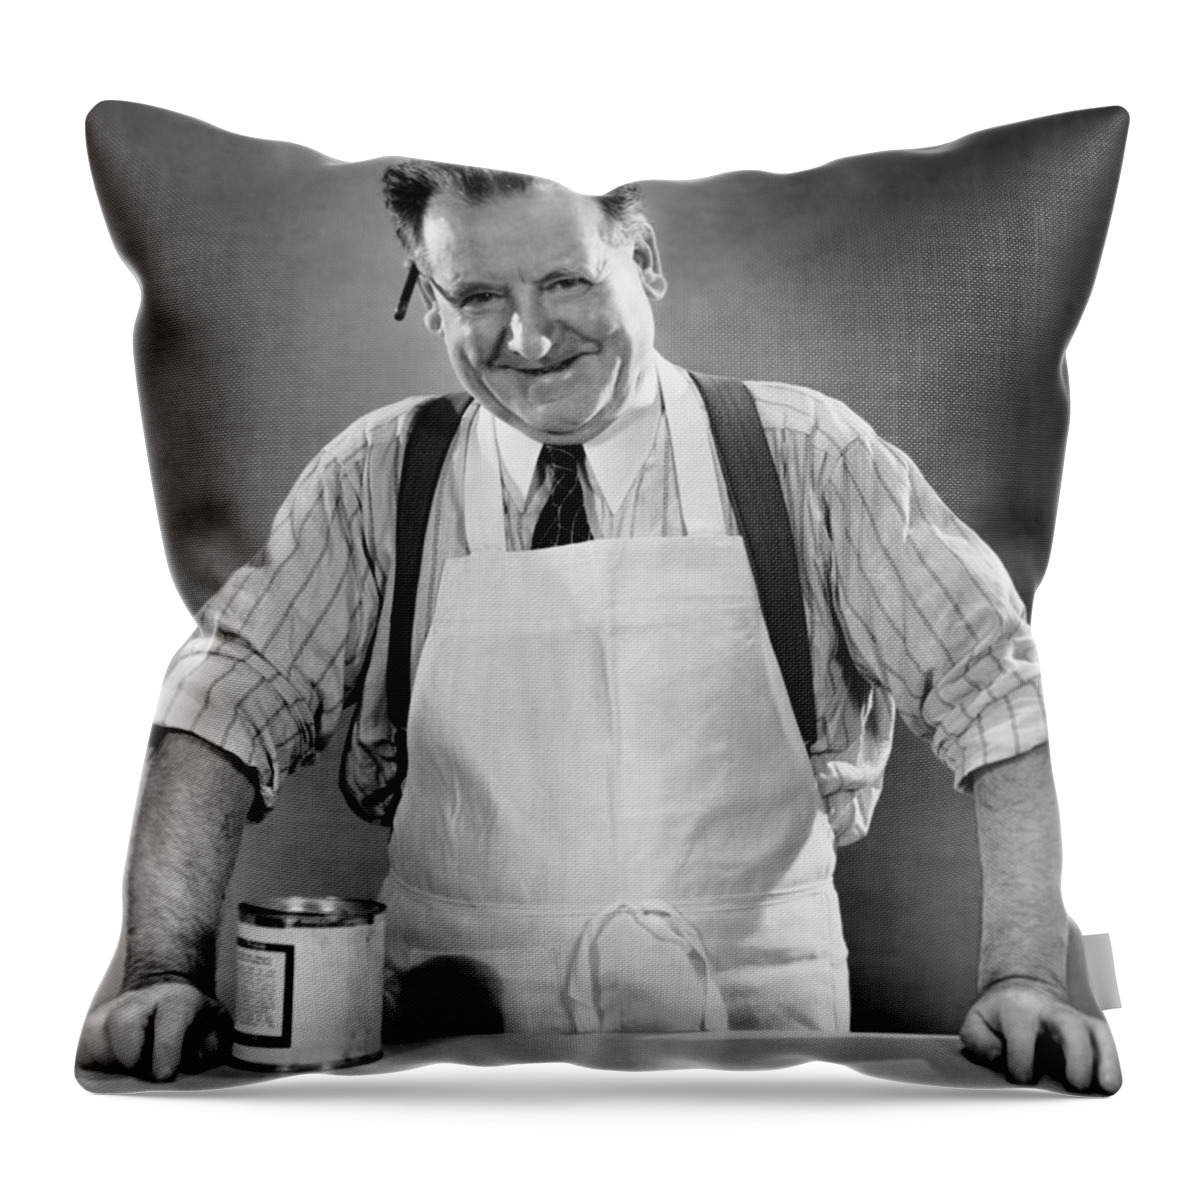 People Throw Pillow featuring the photograph Grocery Store Salesman Wcan On Counter by George Marks